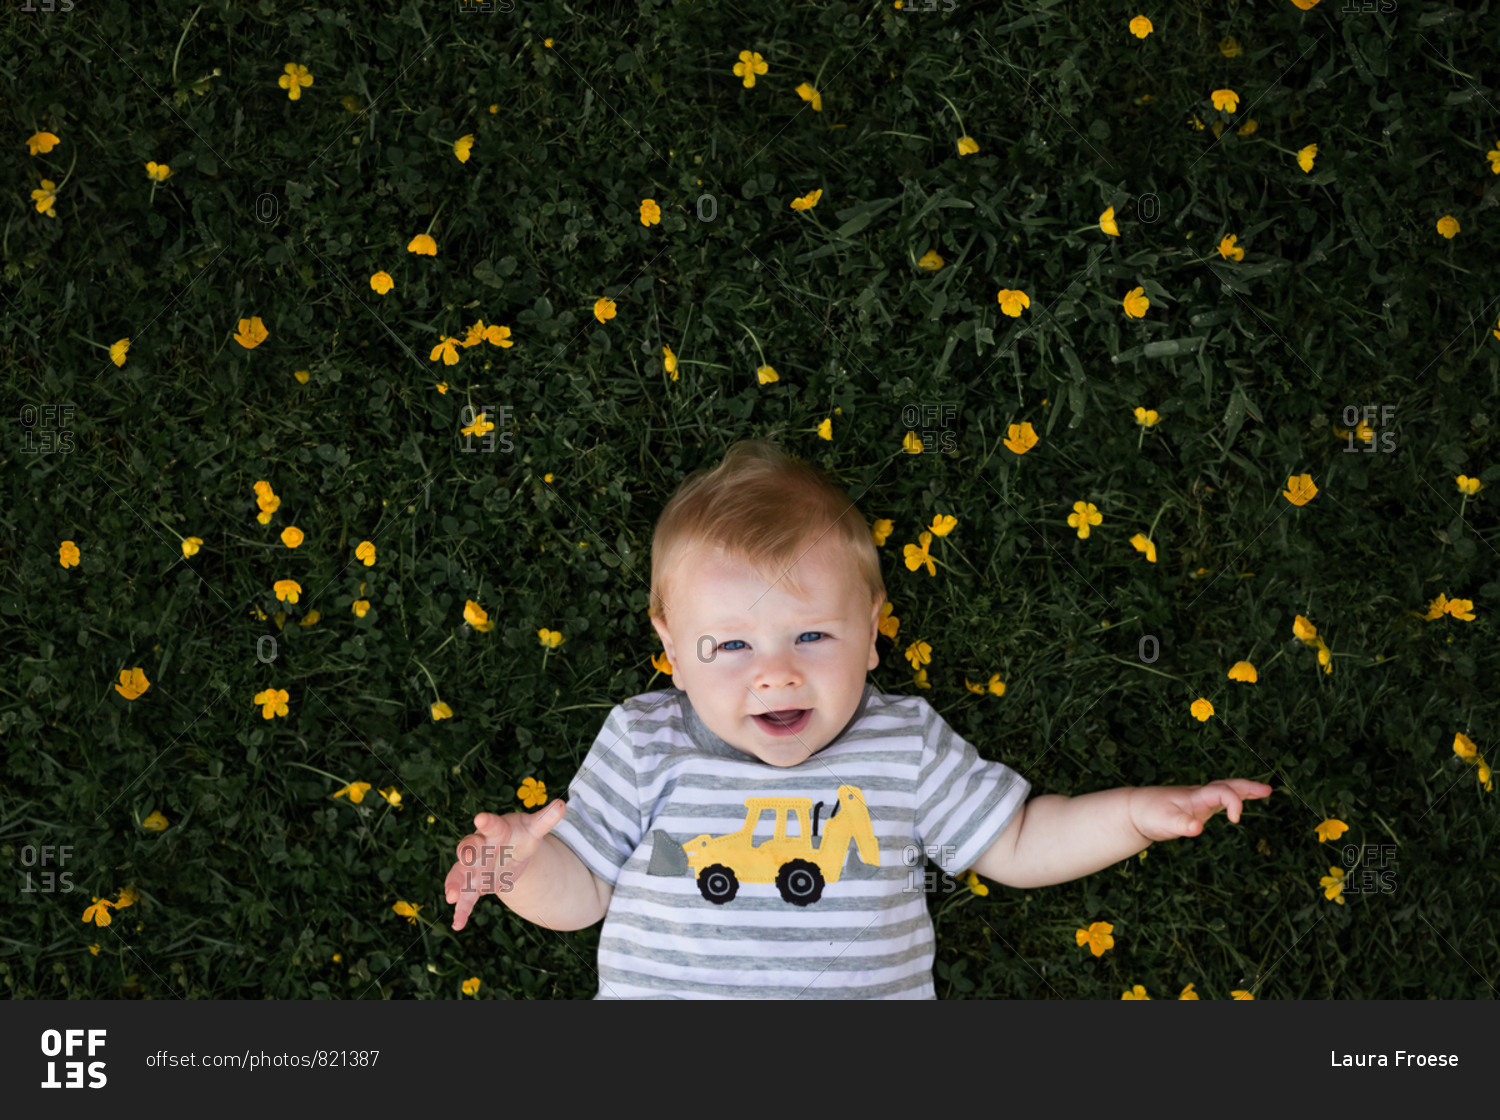 Young boy laying in grassy field with yellow flowers.